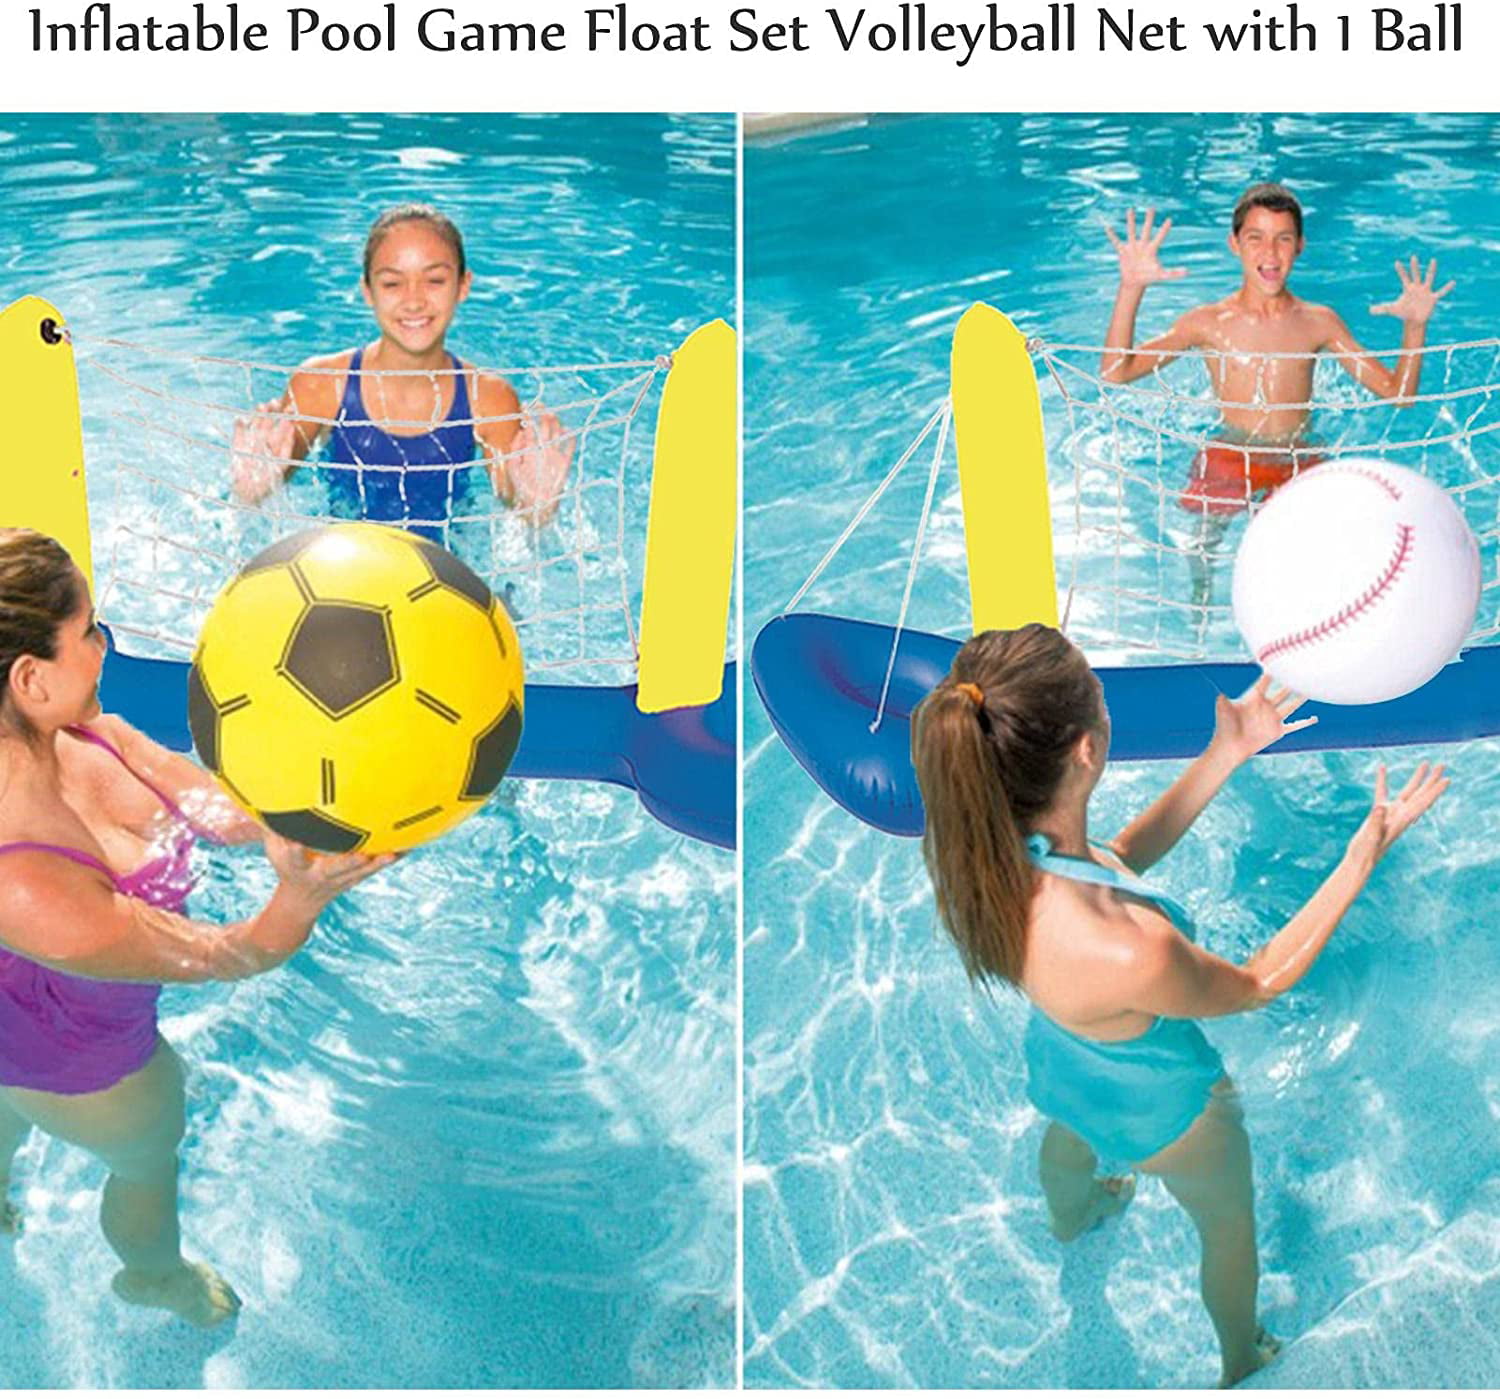 Inflatable Pool Volleyball Game Set Floating Net Water Play Summer Outdoor Funny 